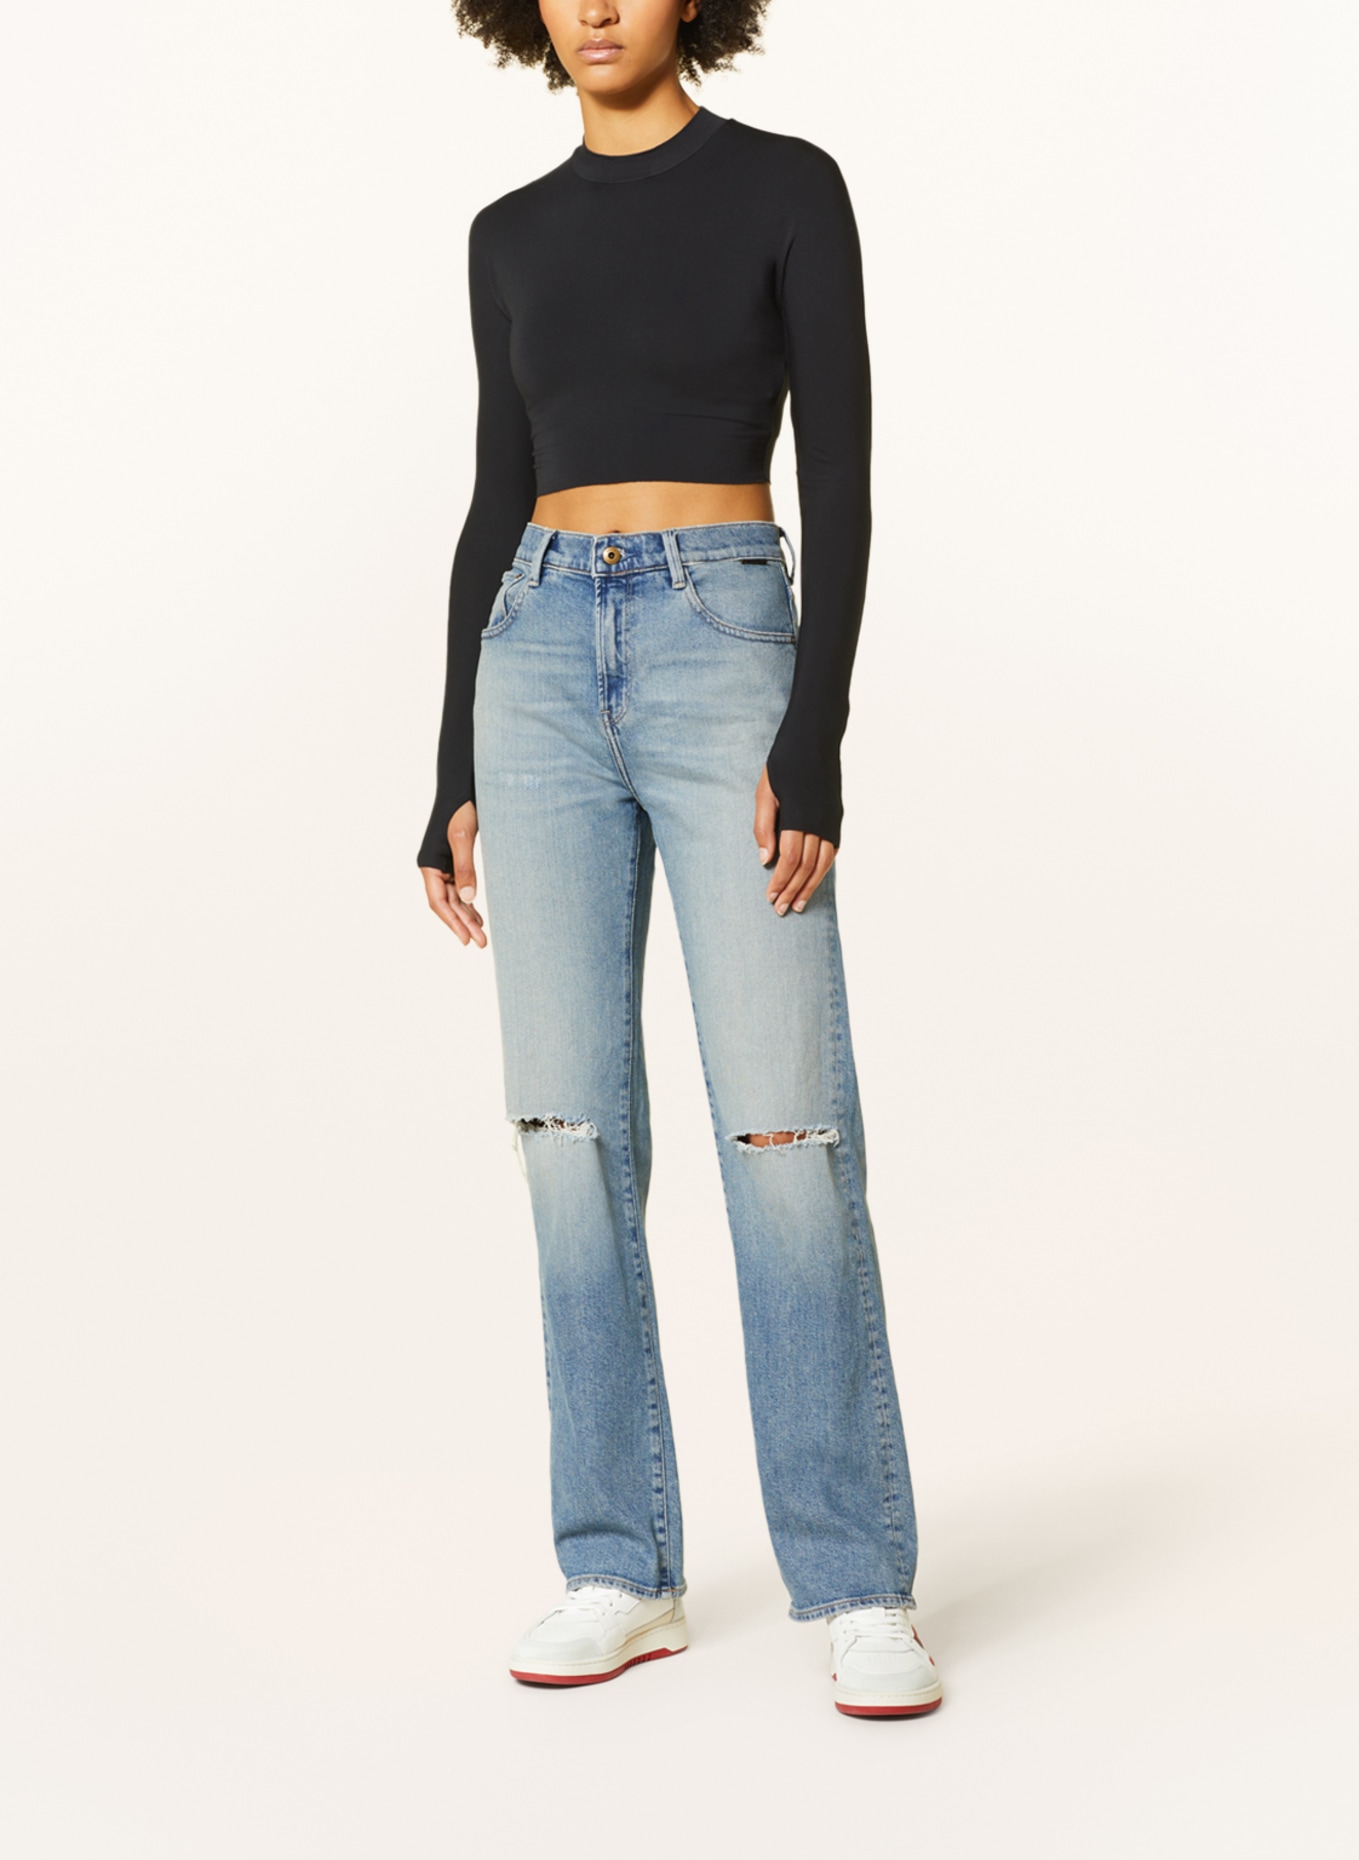 G-Star RAW Straight Jeans VIKTORIA, Farbe: G130 antique faded blue agave ripped (Bild 2)